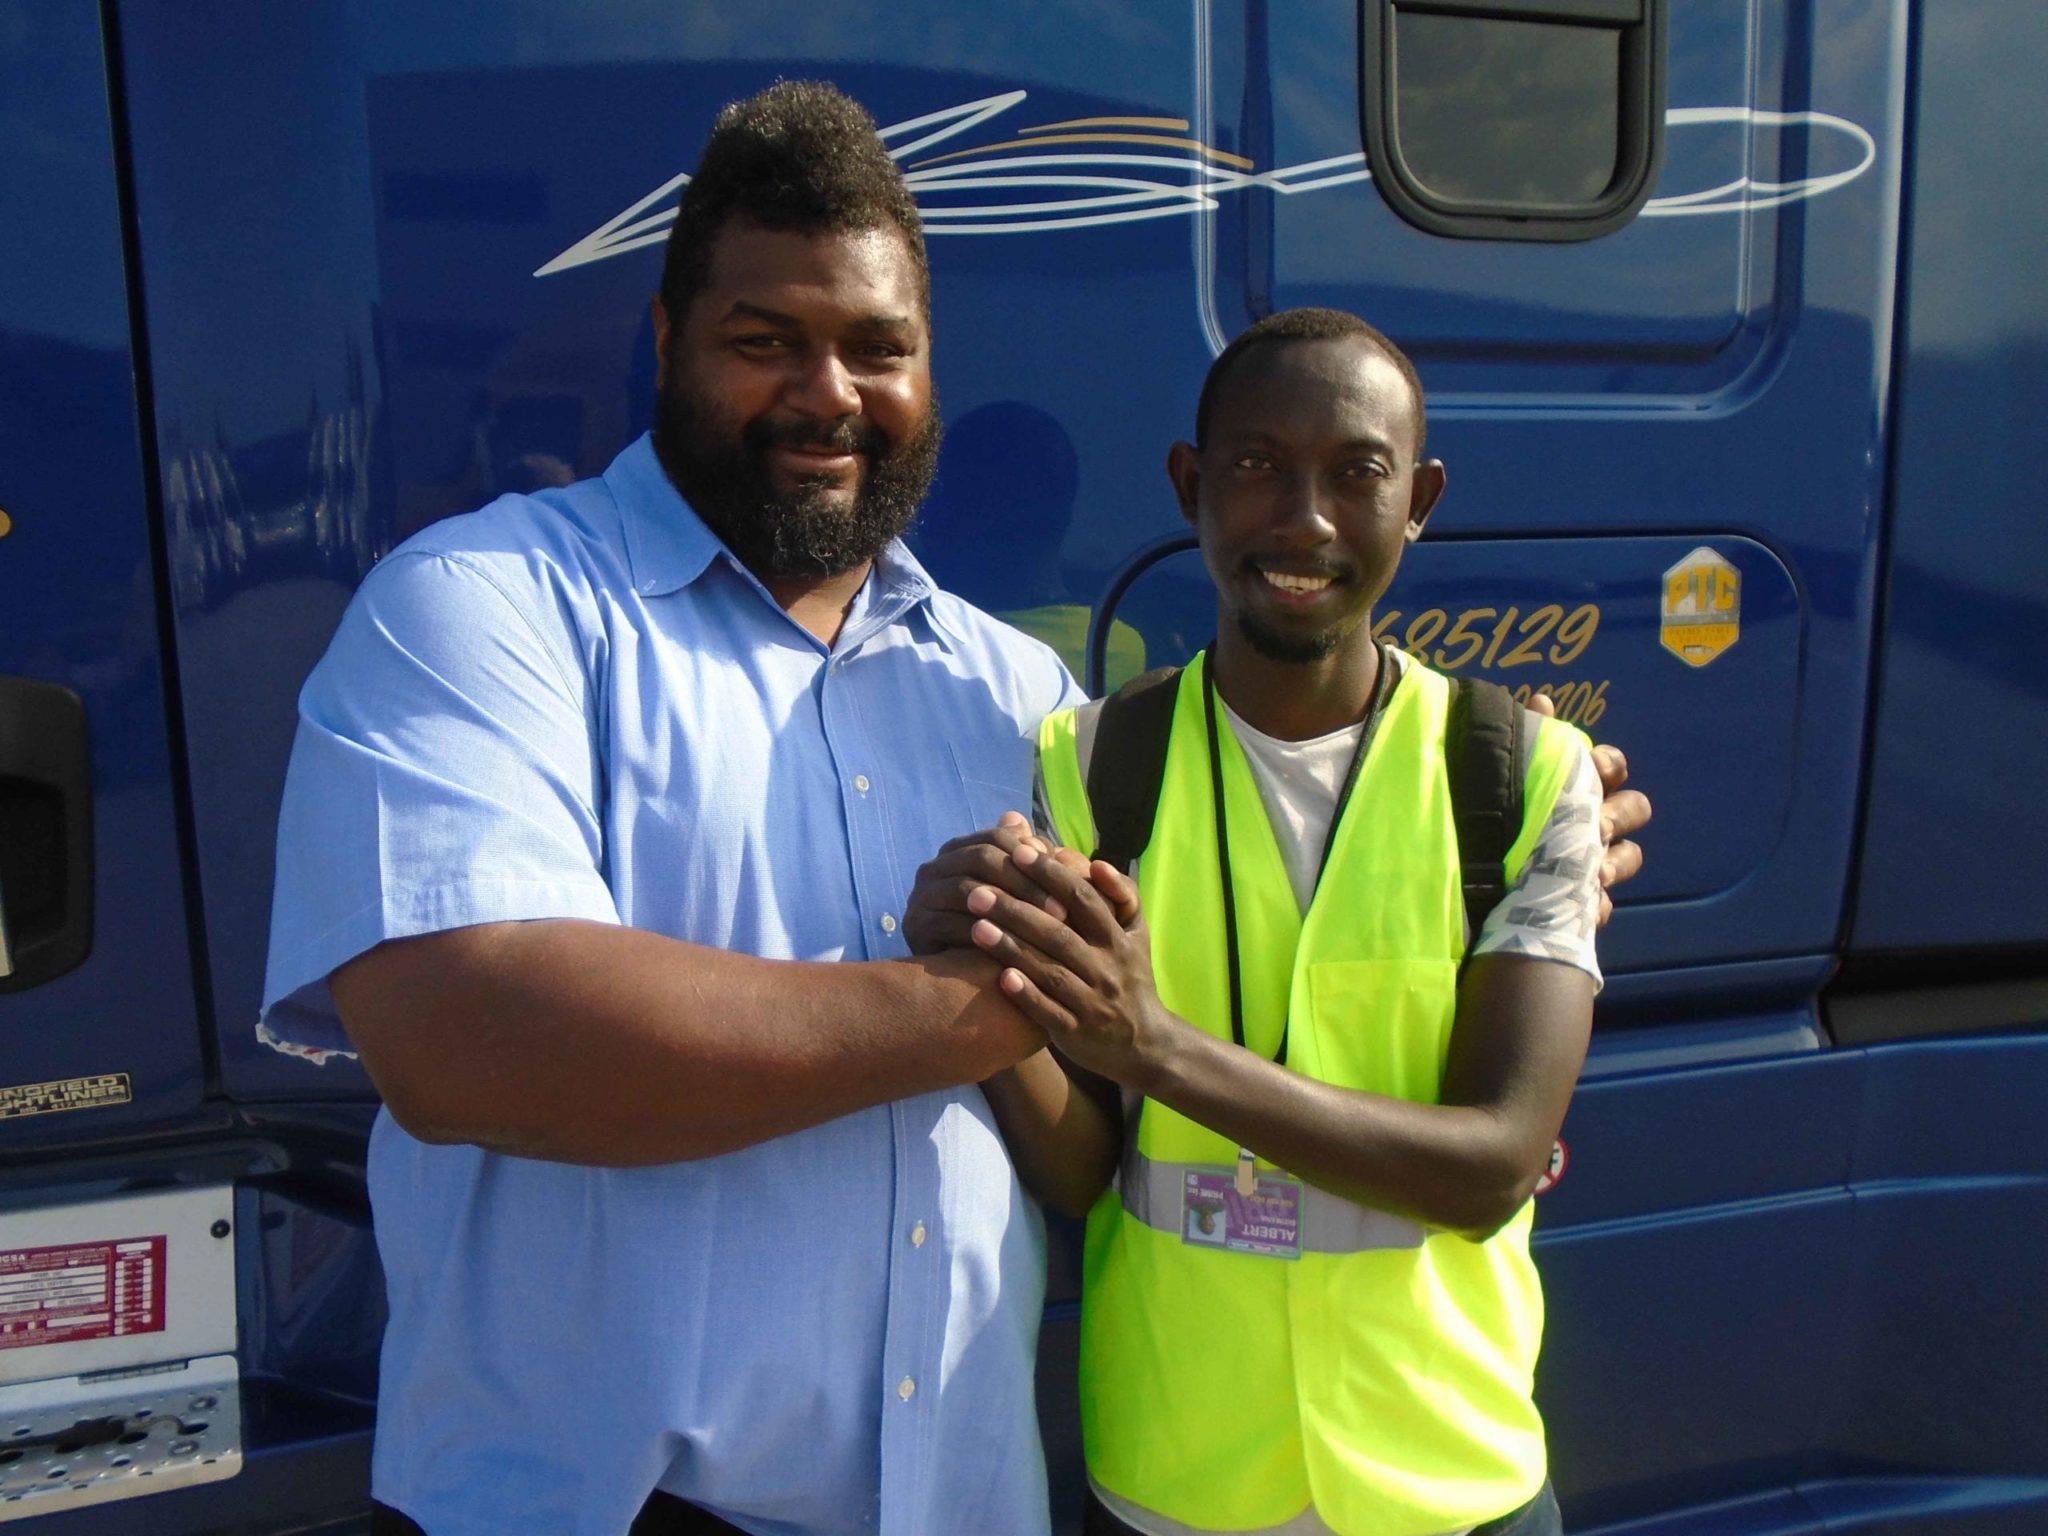 A Prime, Inc. student driver posing for a picture in front of a blue semi-truck with his instructor.